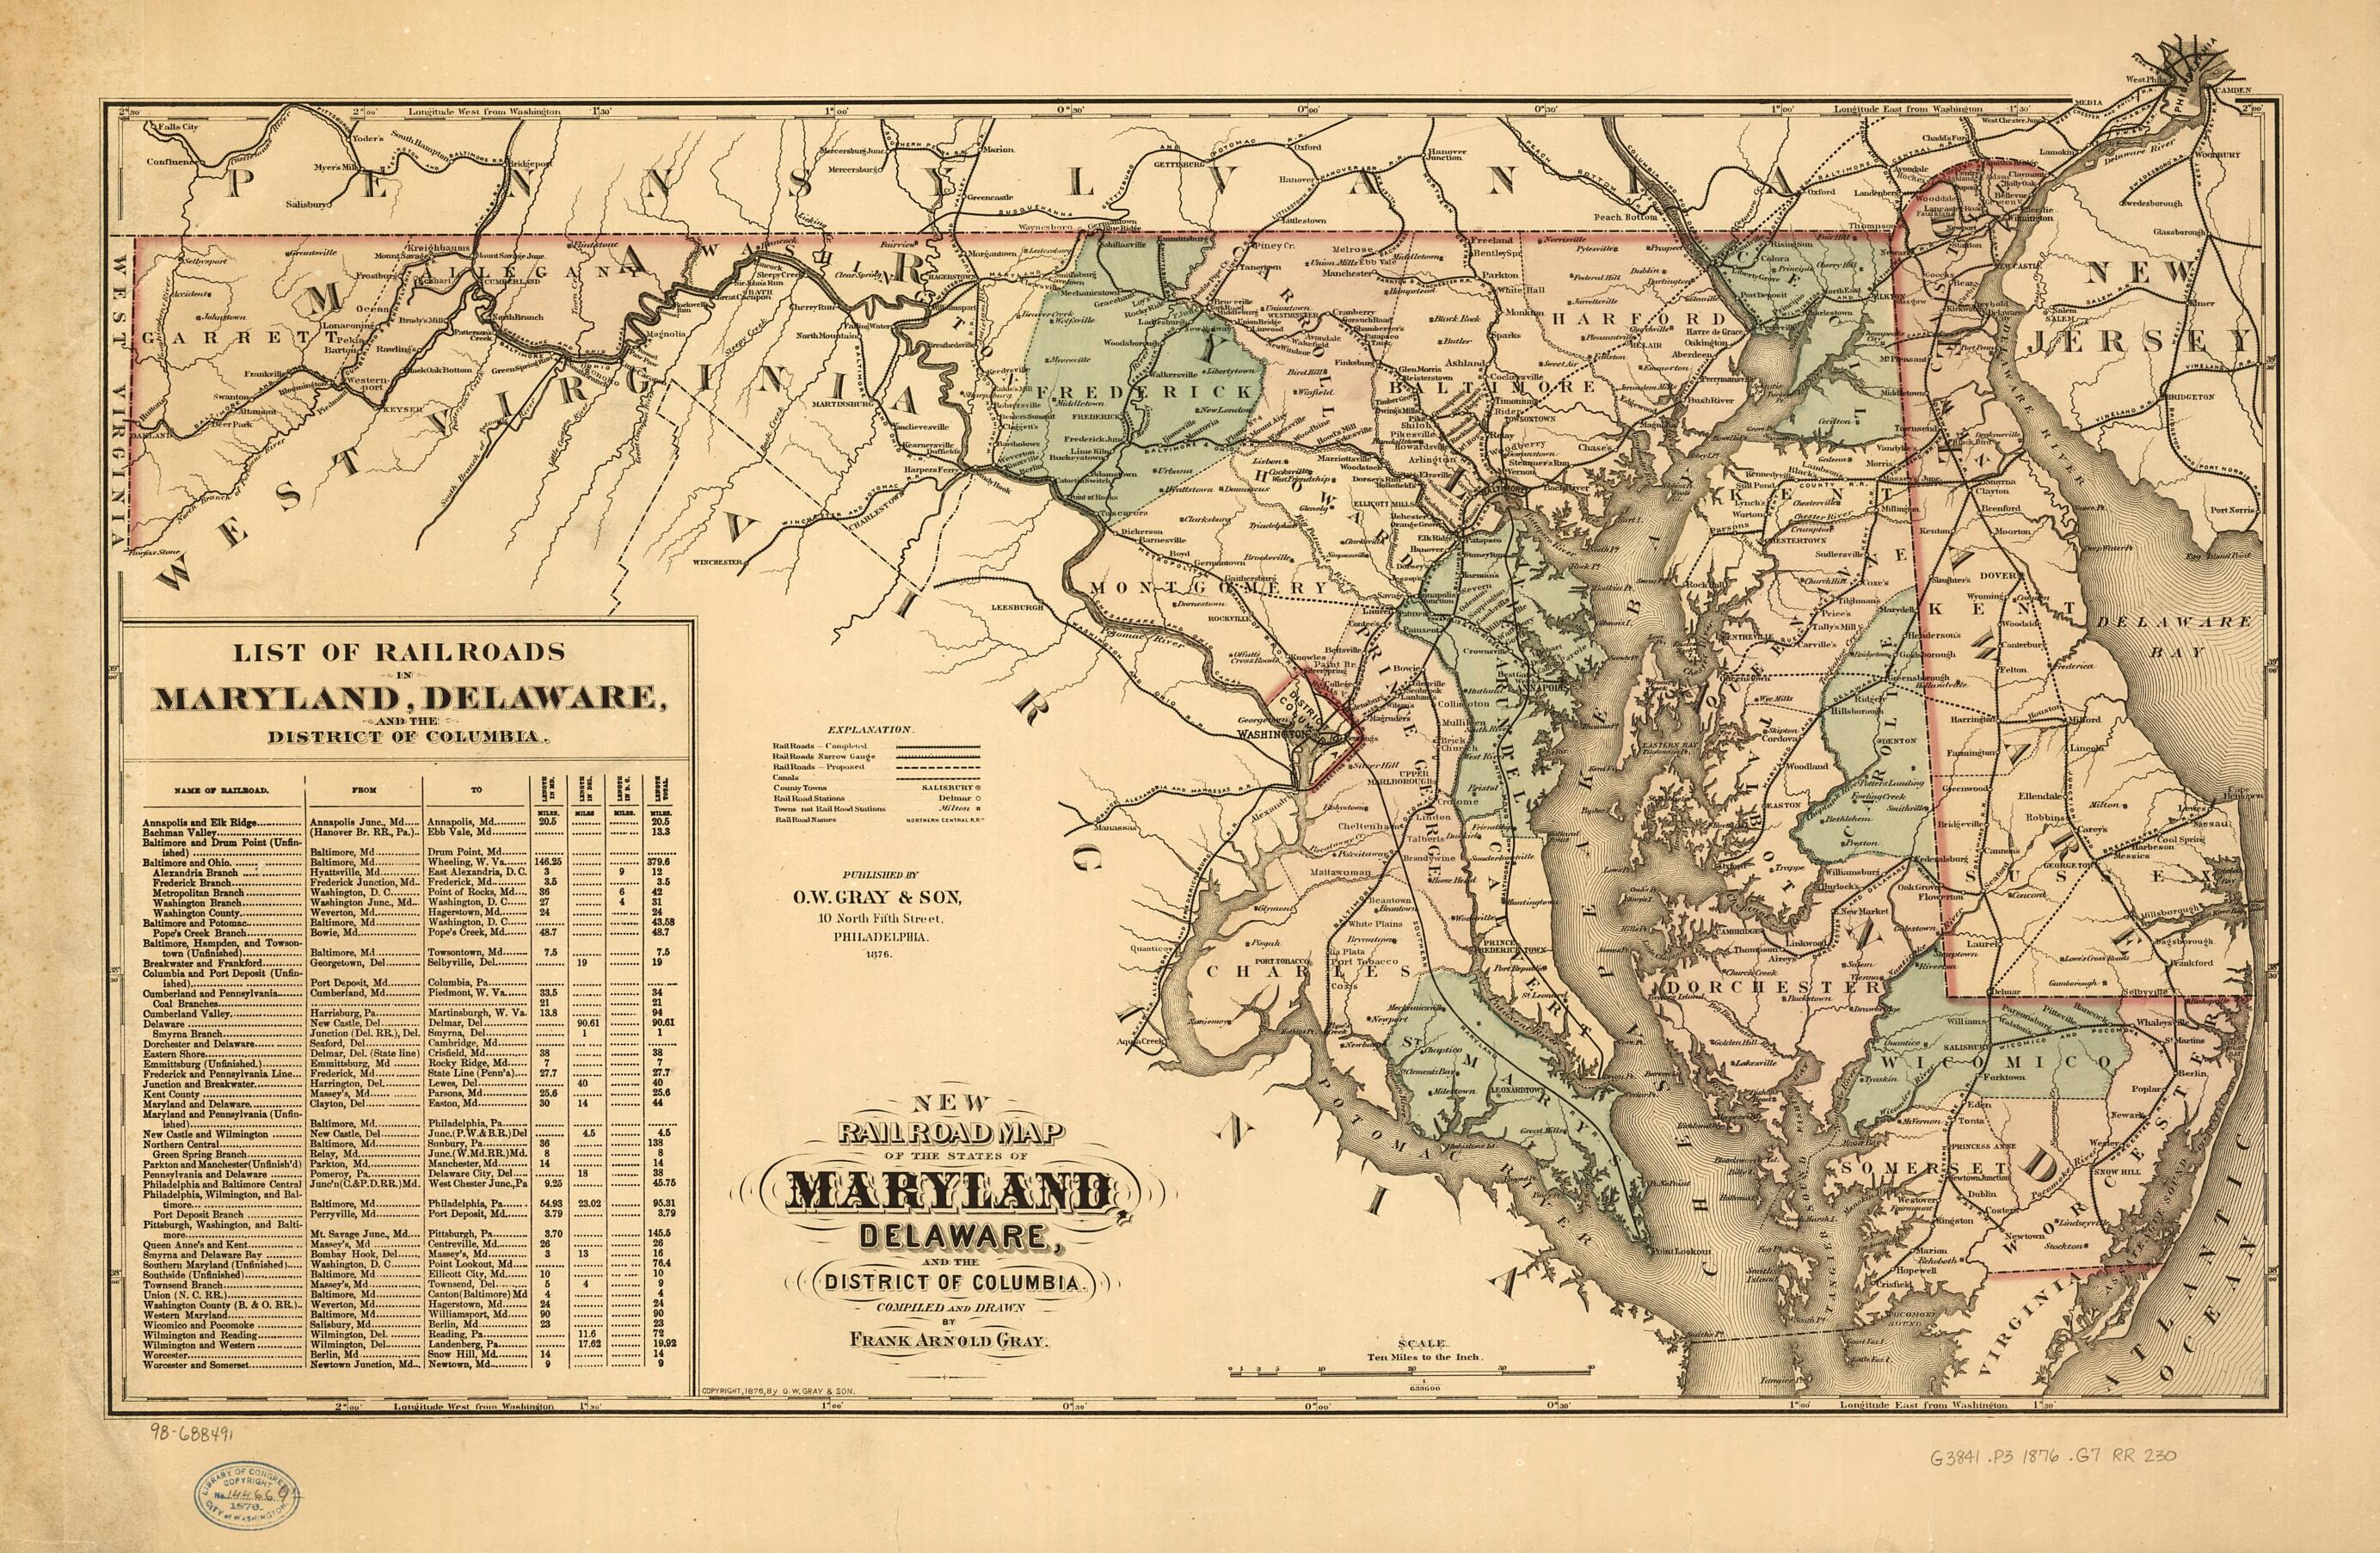 This old map of New Railroad Map of the State of Maryland, Delaware, and the District of Columbia. Compiled and Drawn by Frank Arnold Gray from 1876 was created by Frank Arnold Gray in 1876